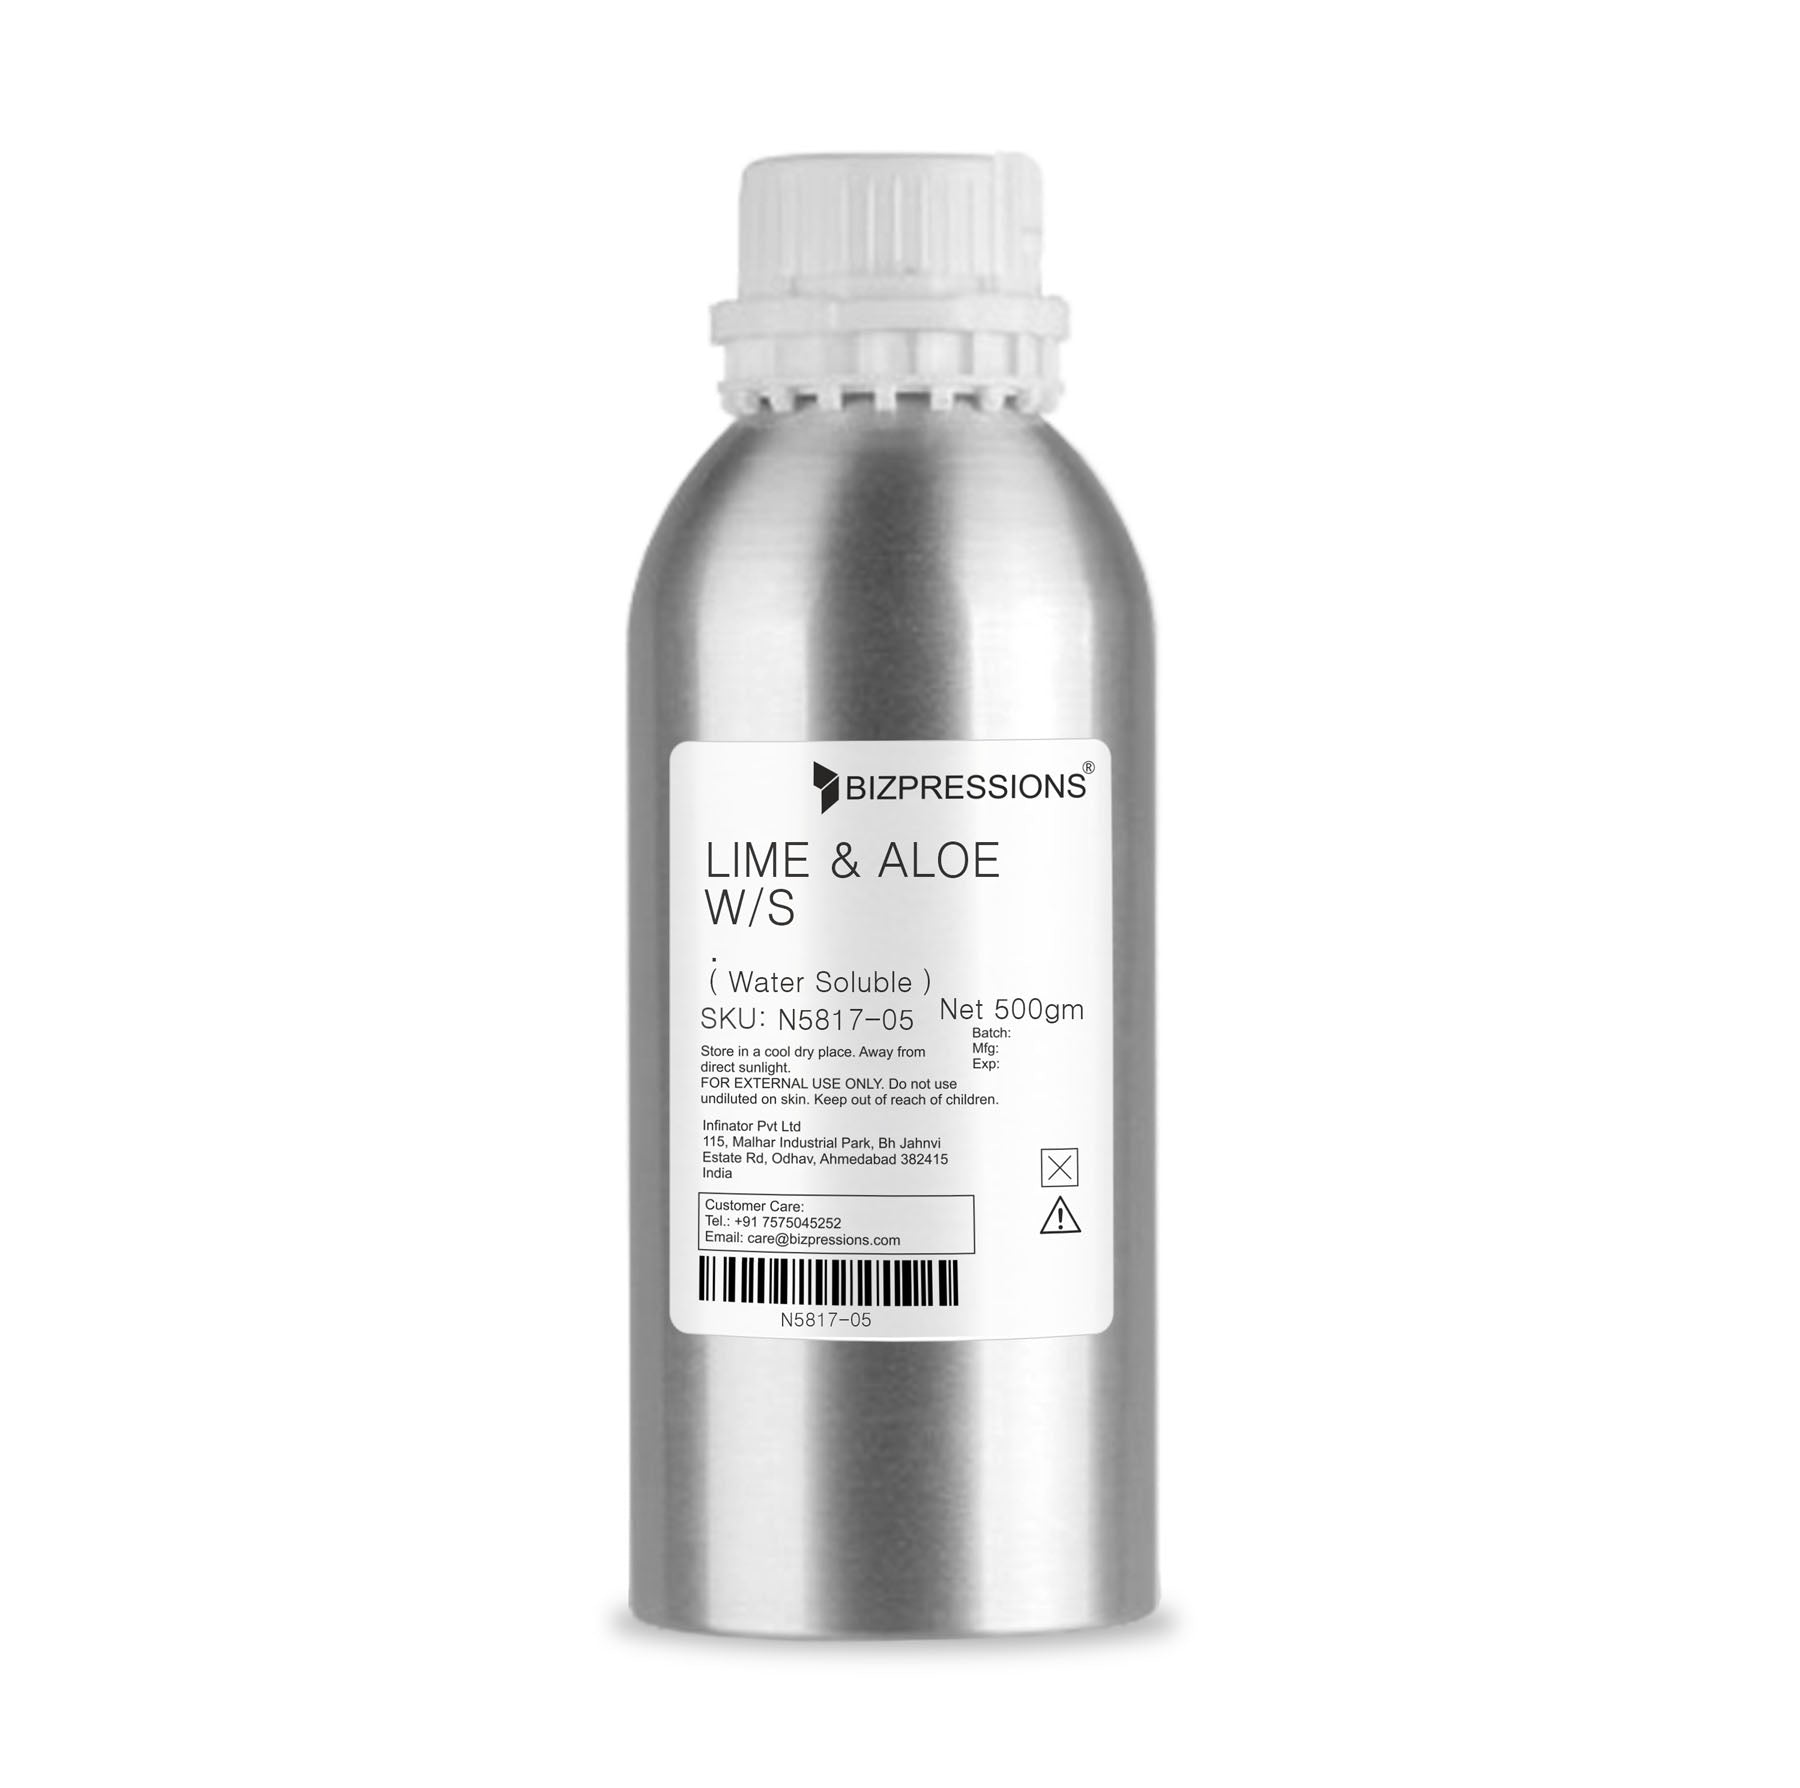 LIME & ALOE W/S - Fragrance ( Water Soluble ) - 500 gm